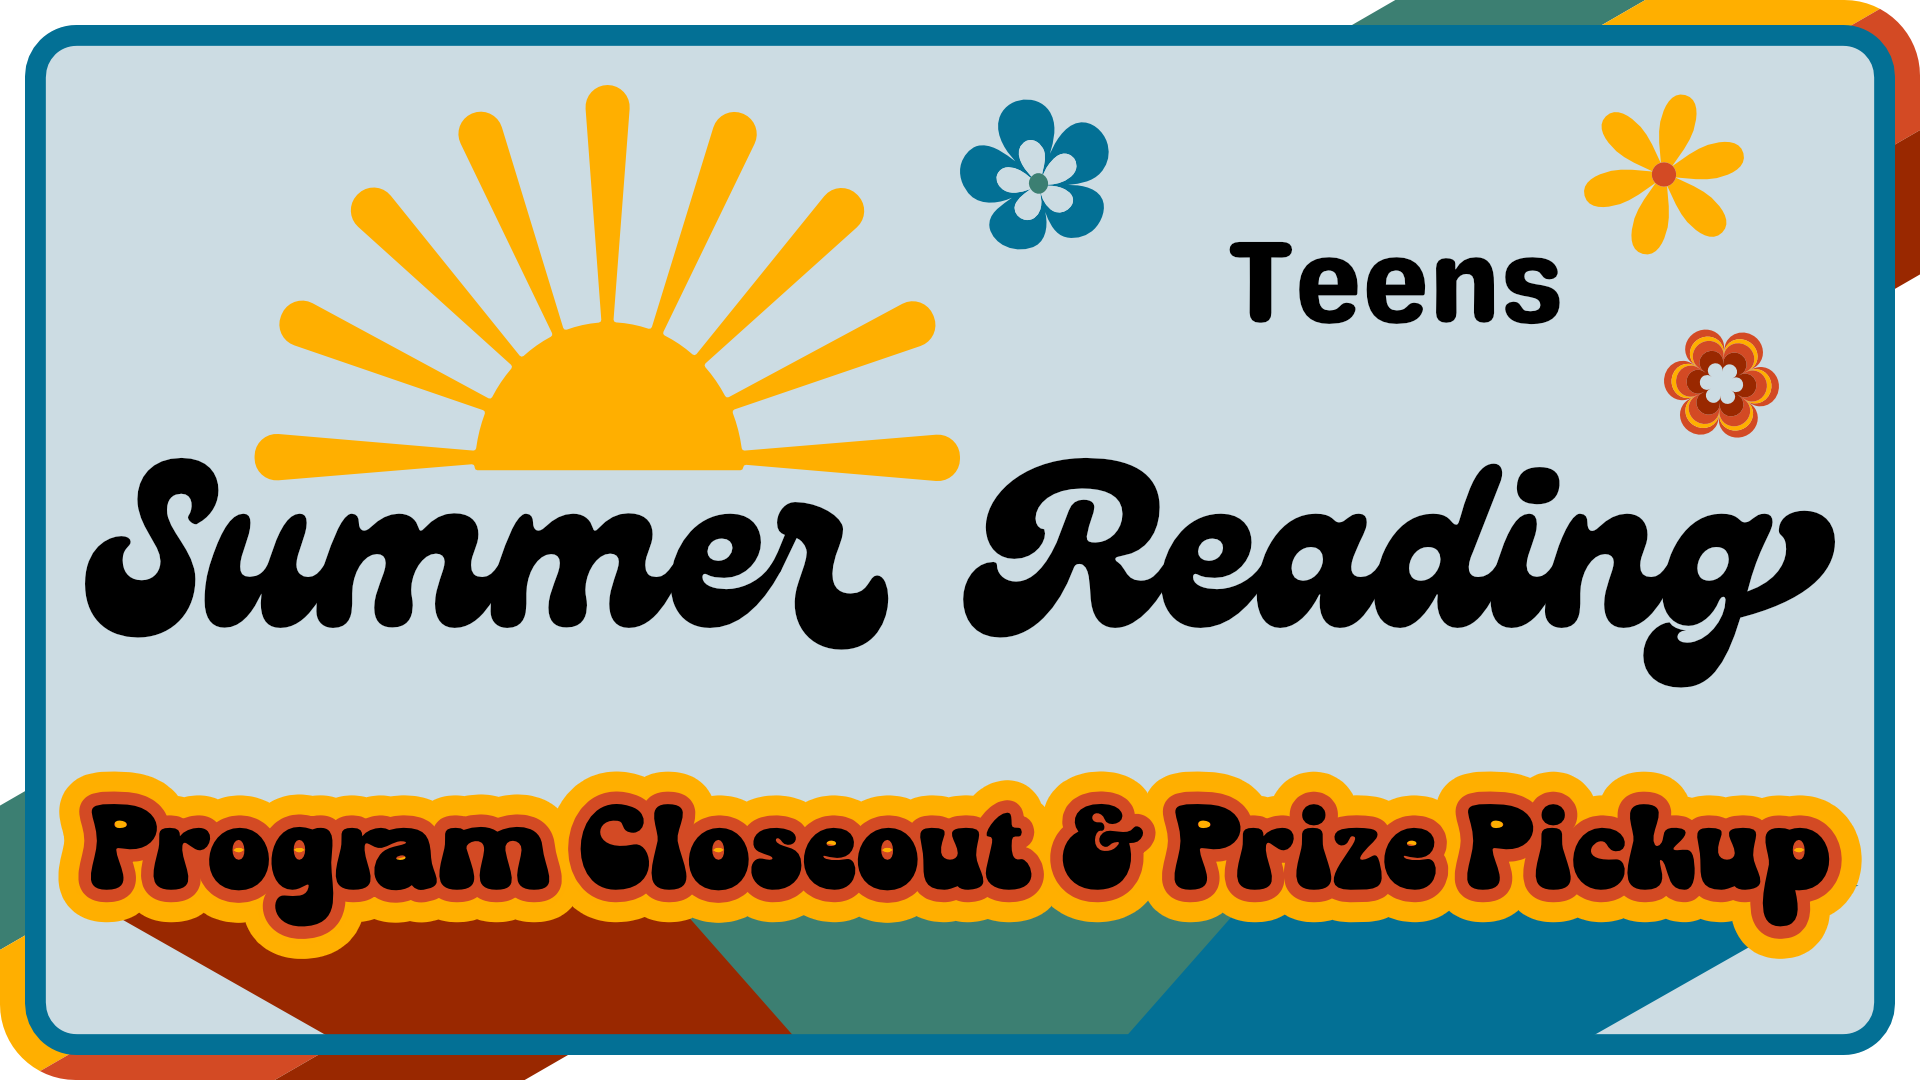 Summer Reading program closeout and prize pickup for teens